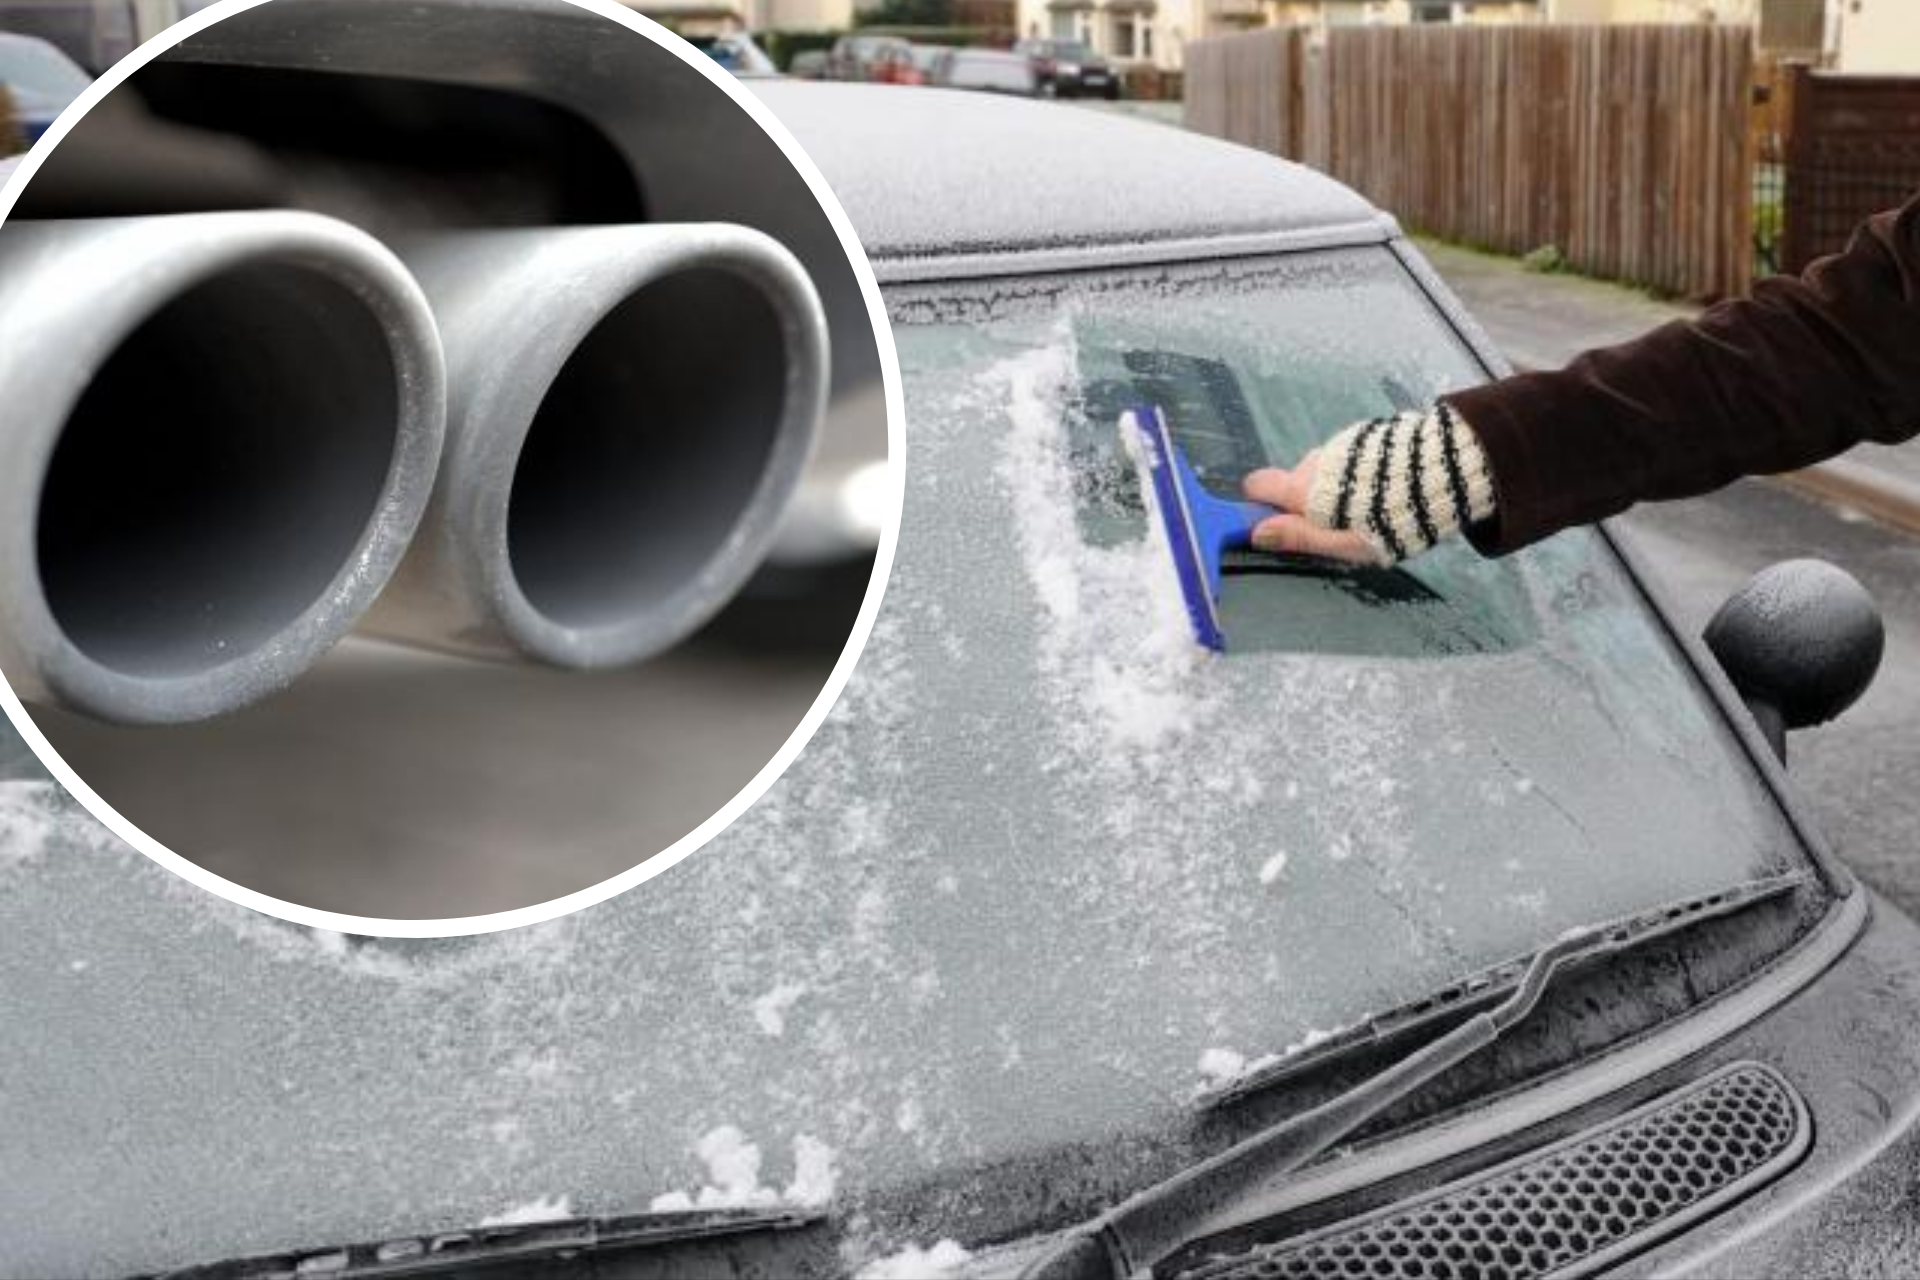 Is it illegal to leave engine running while defrosting your car